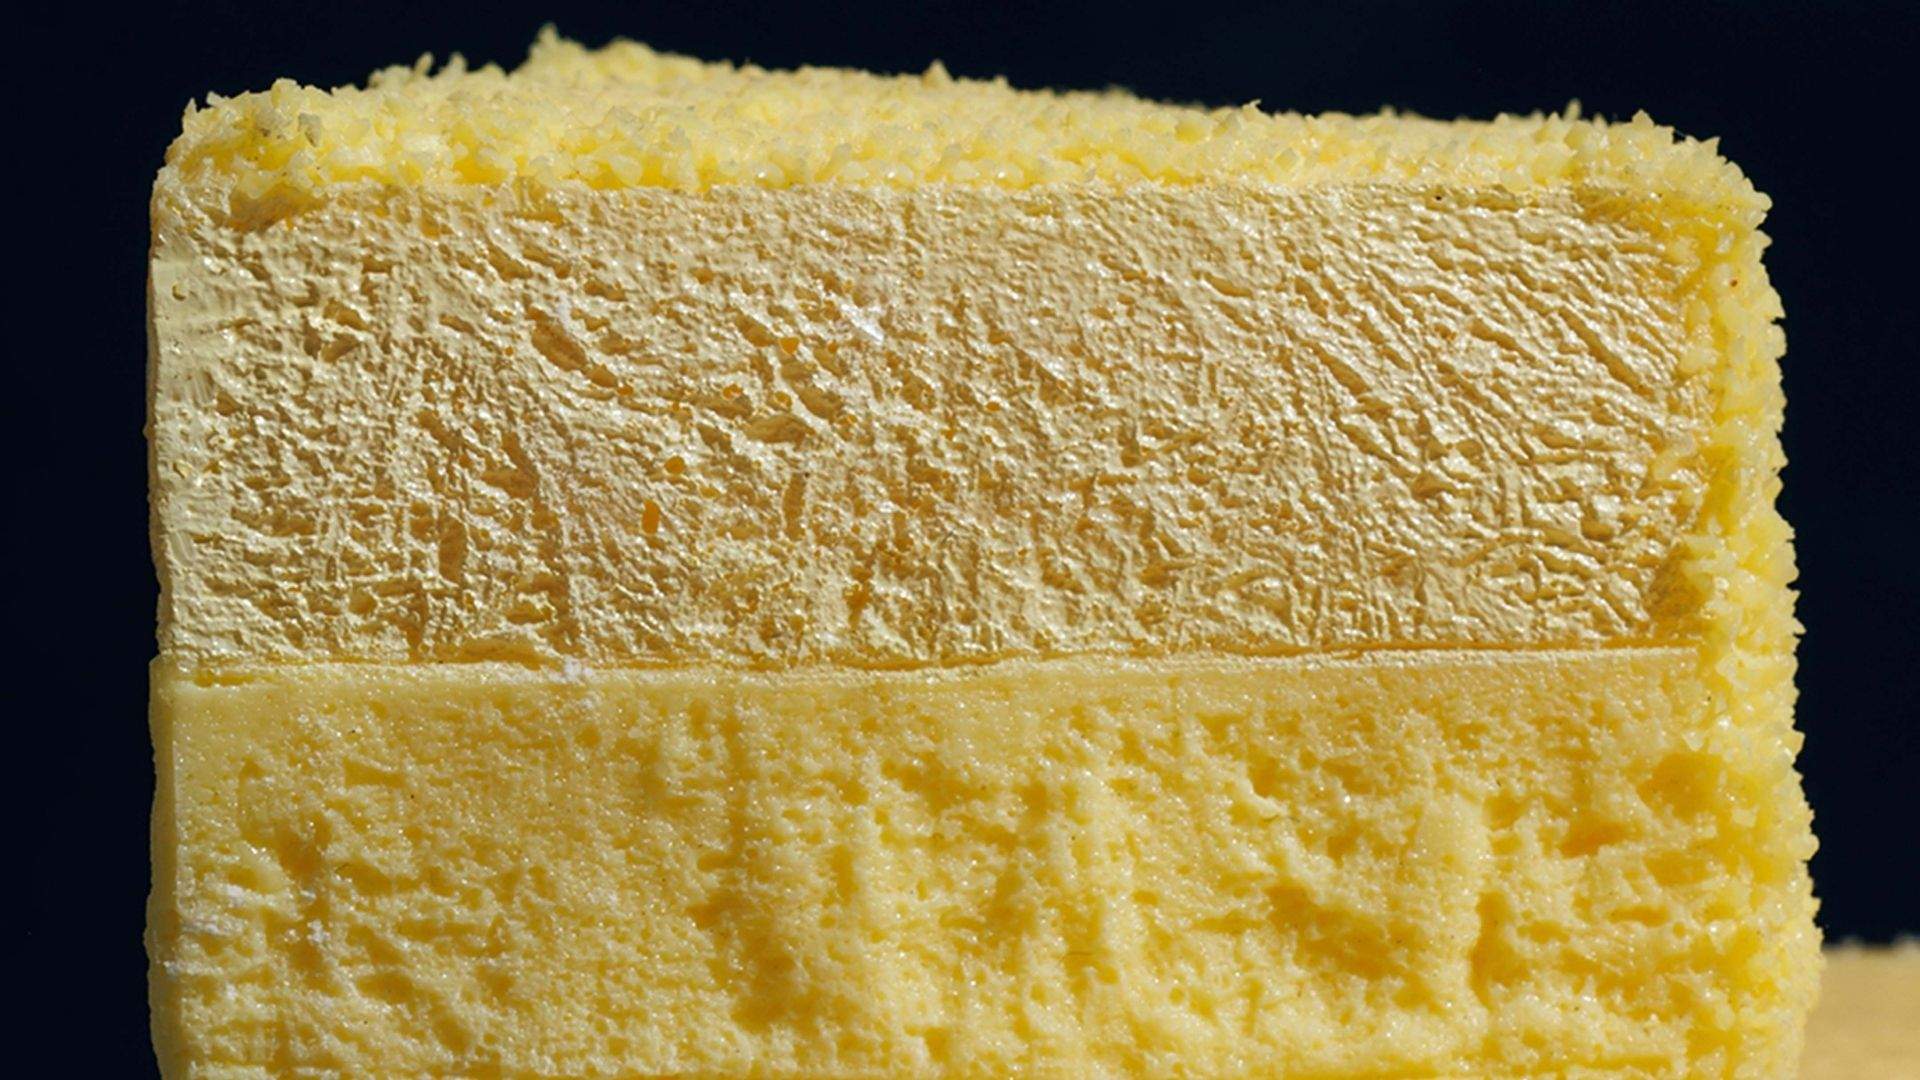 Close-up shot of LeTAO's iconic 'fromage double' cheesecake.